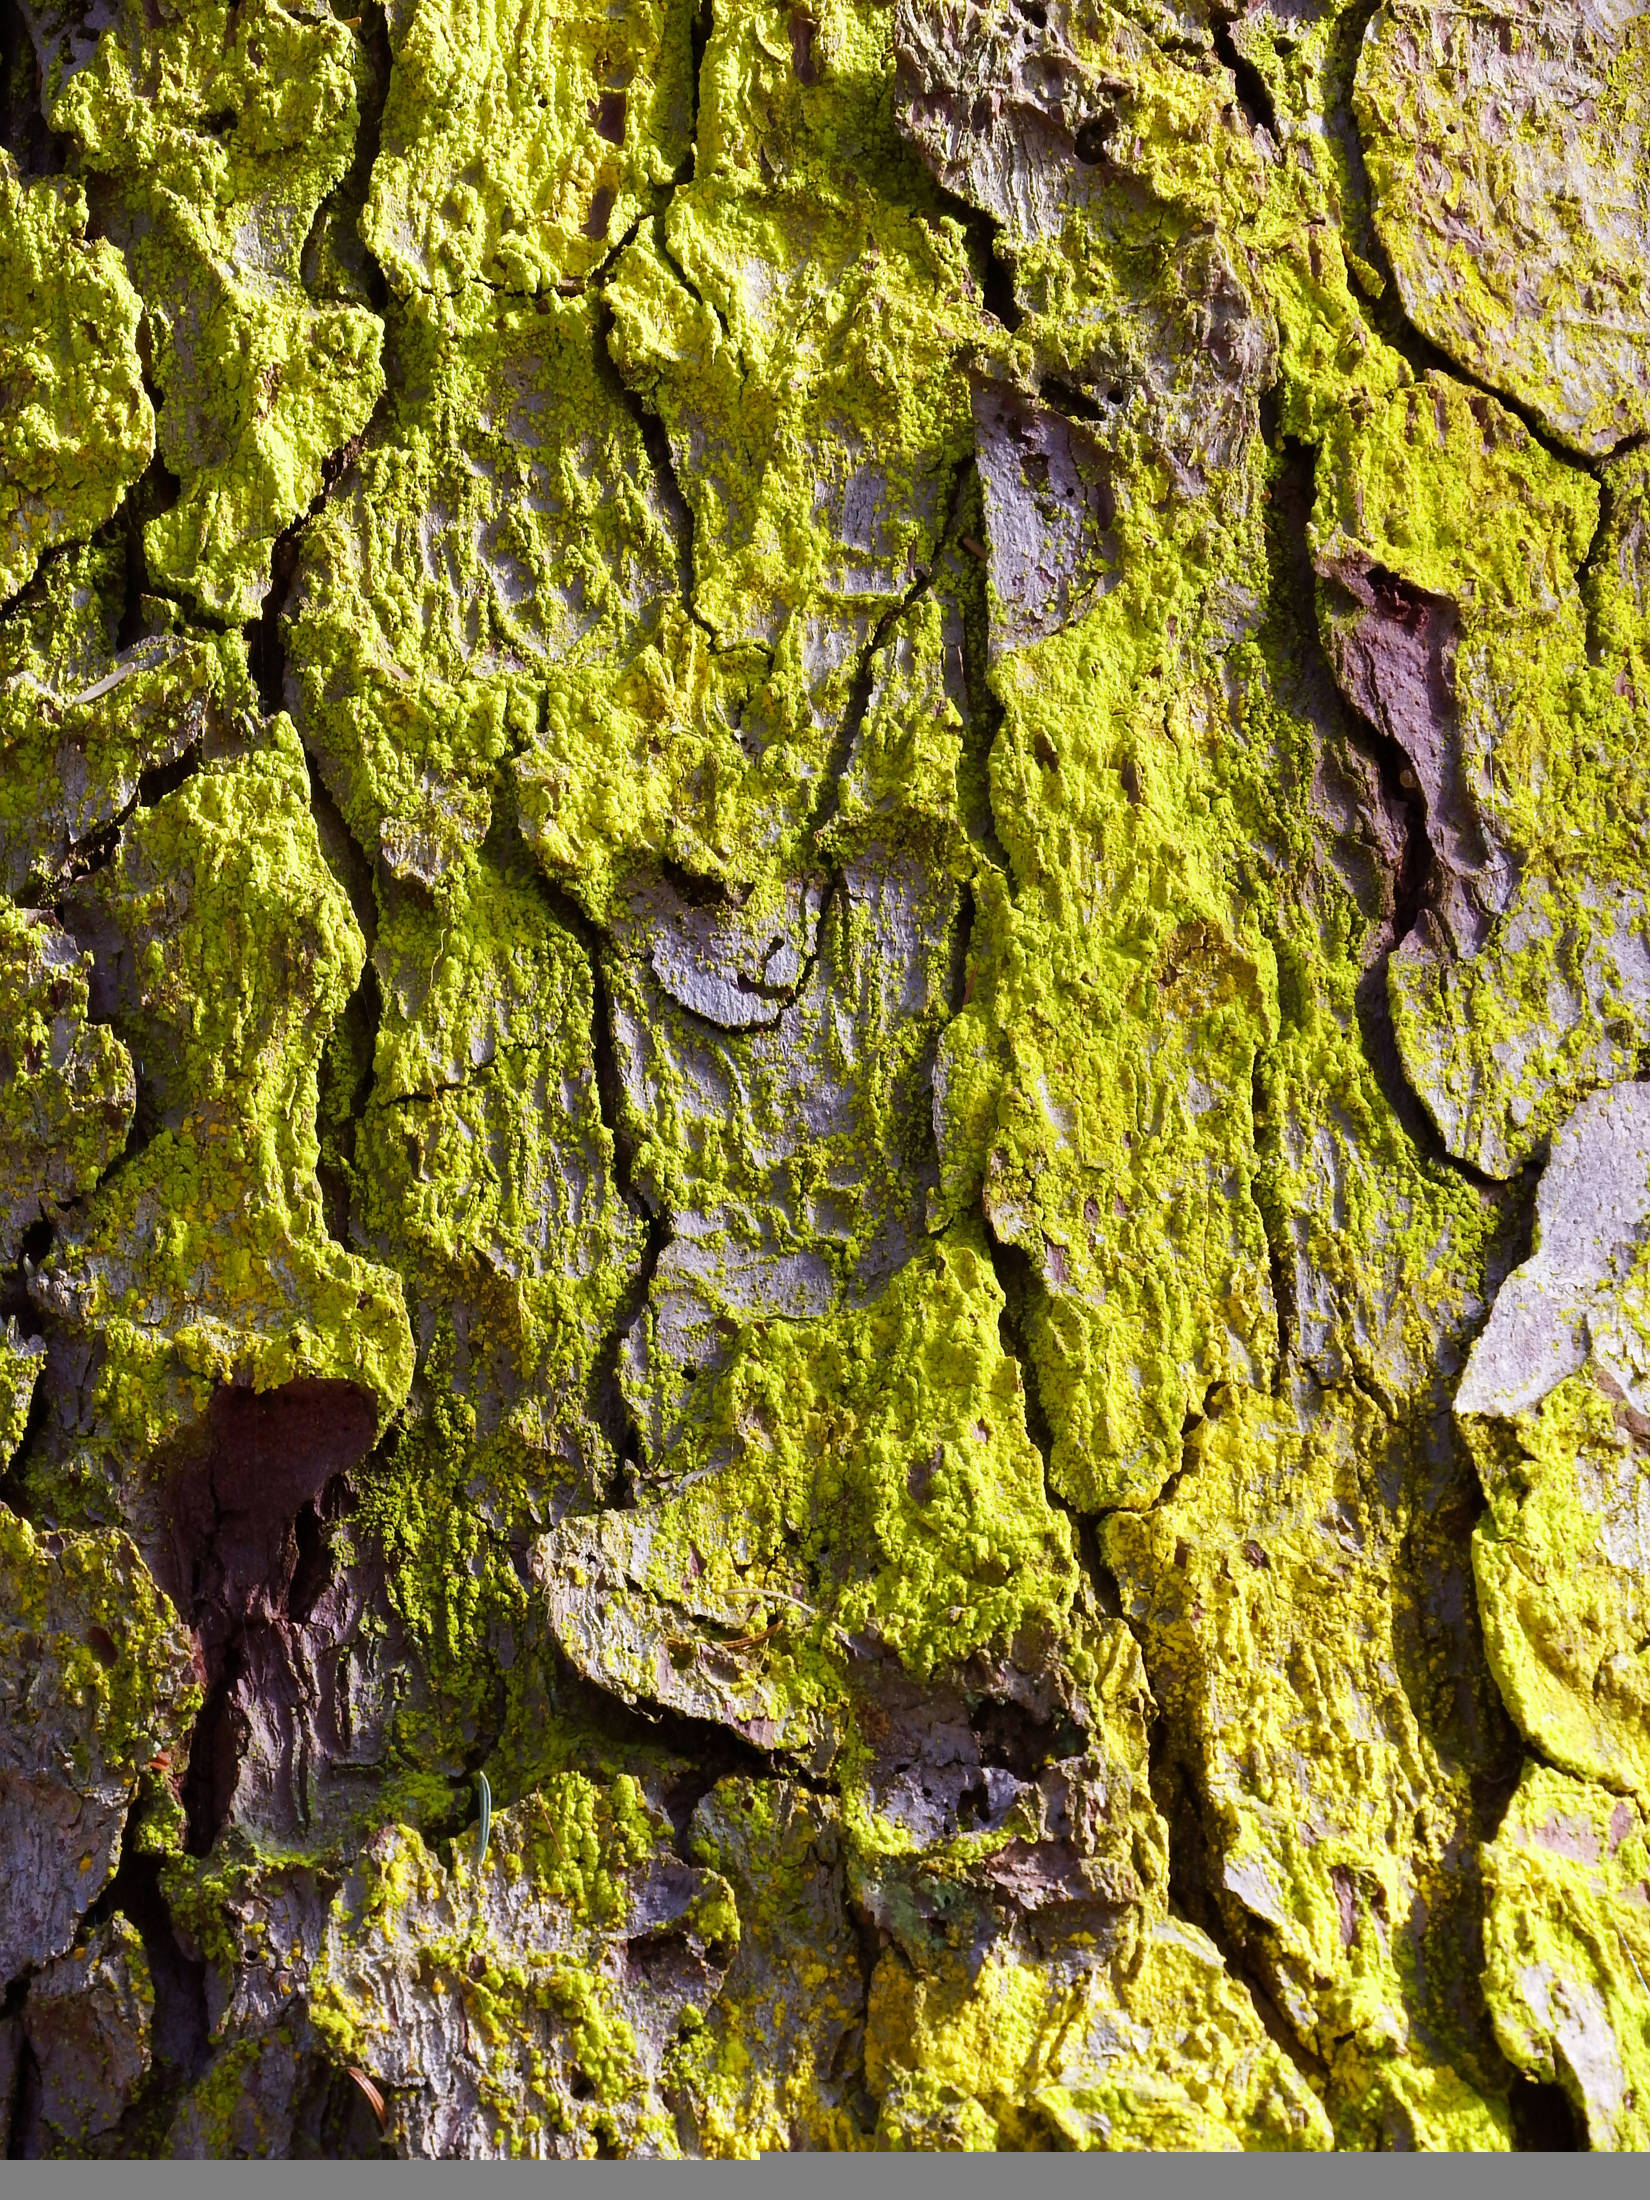 Lime-colored lichen along Point Louisa trail on April 22. Photo by Linda Shaw.